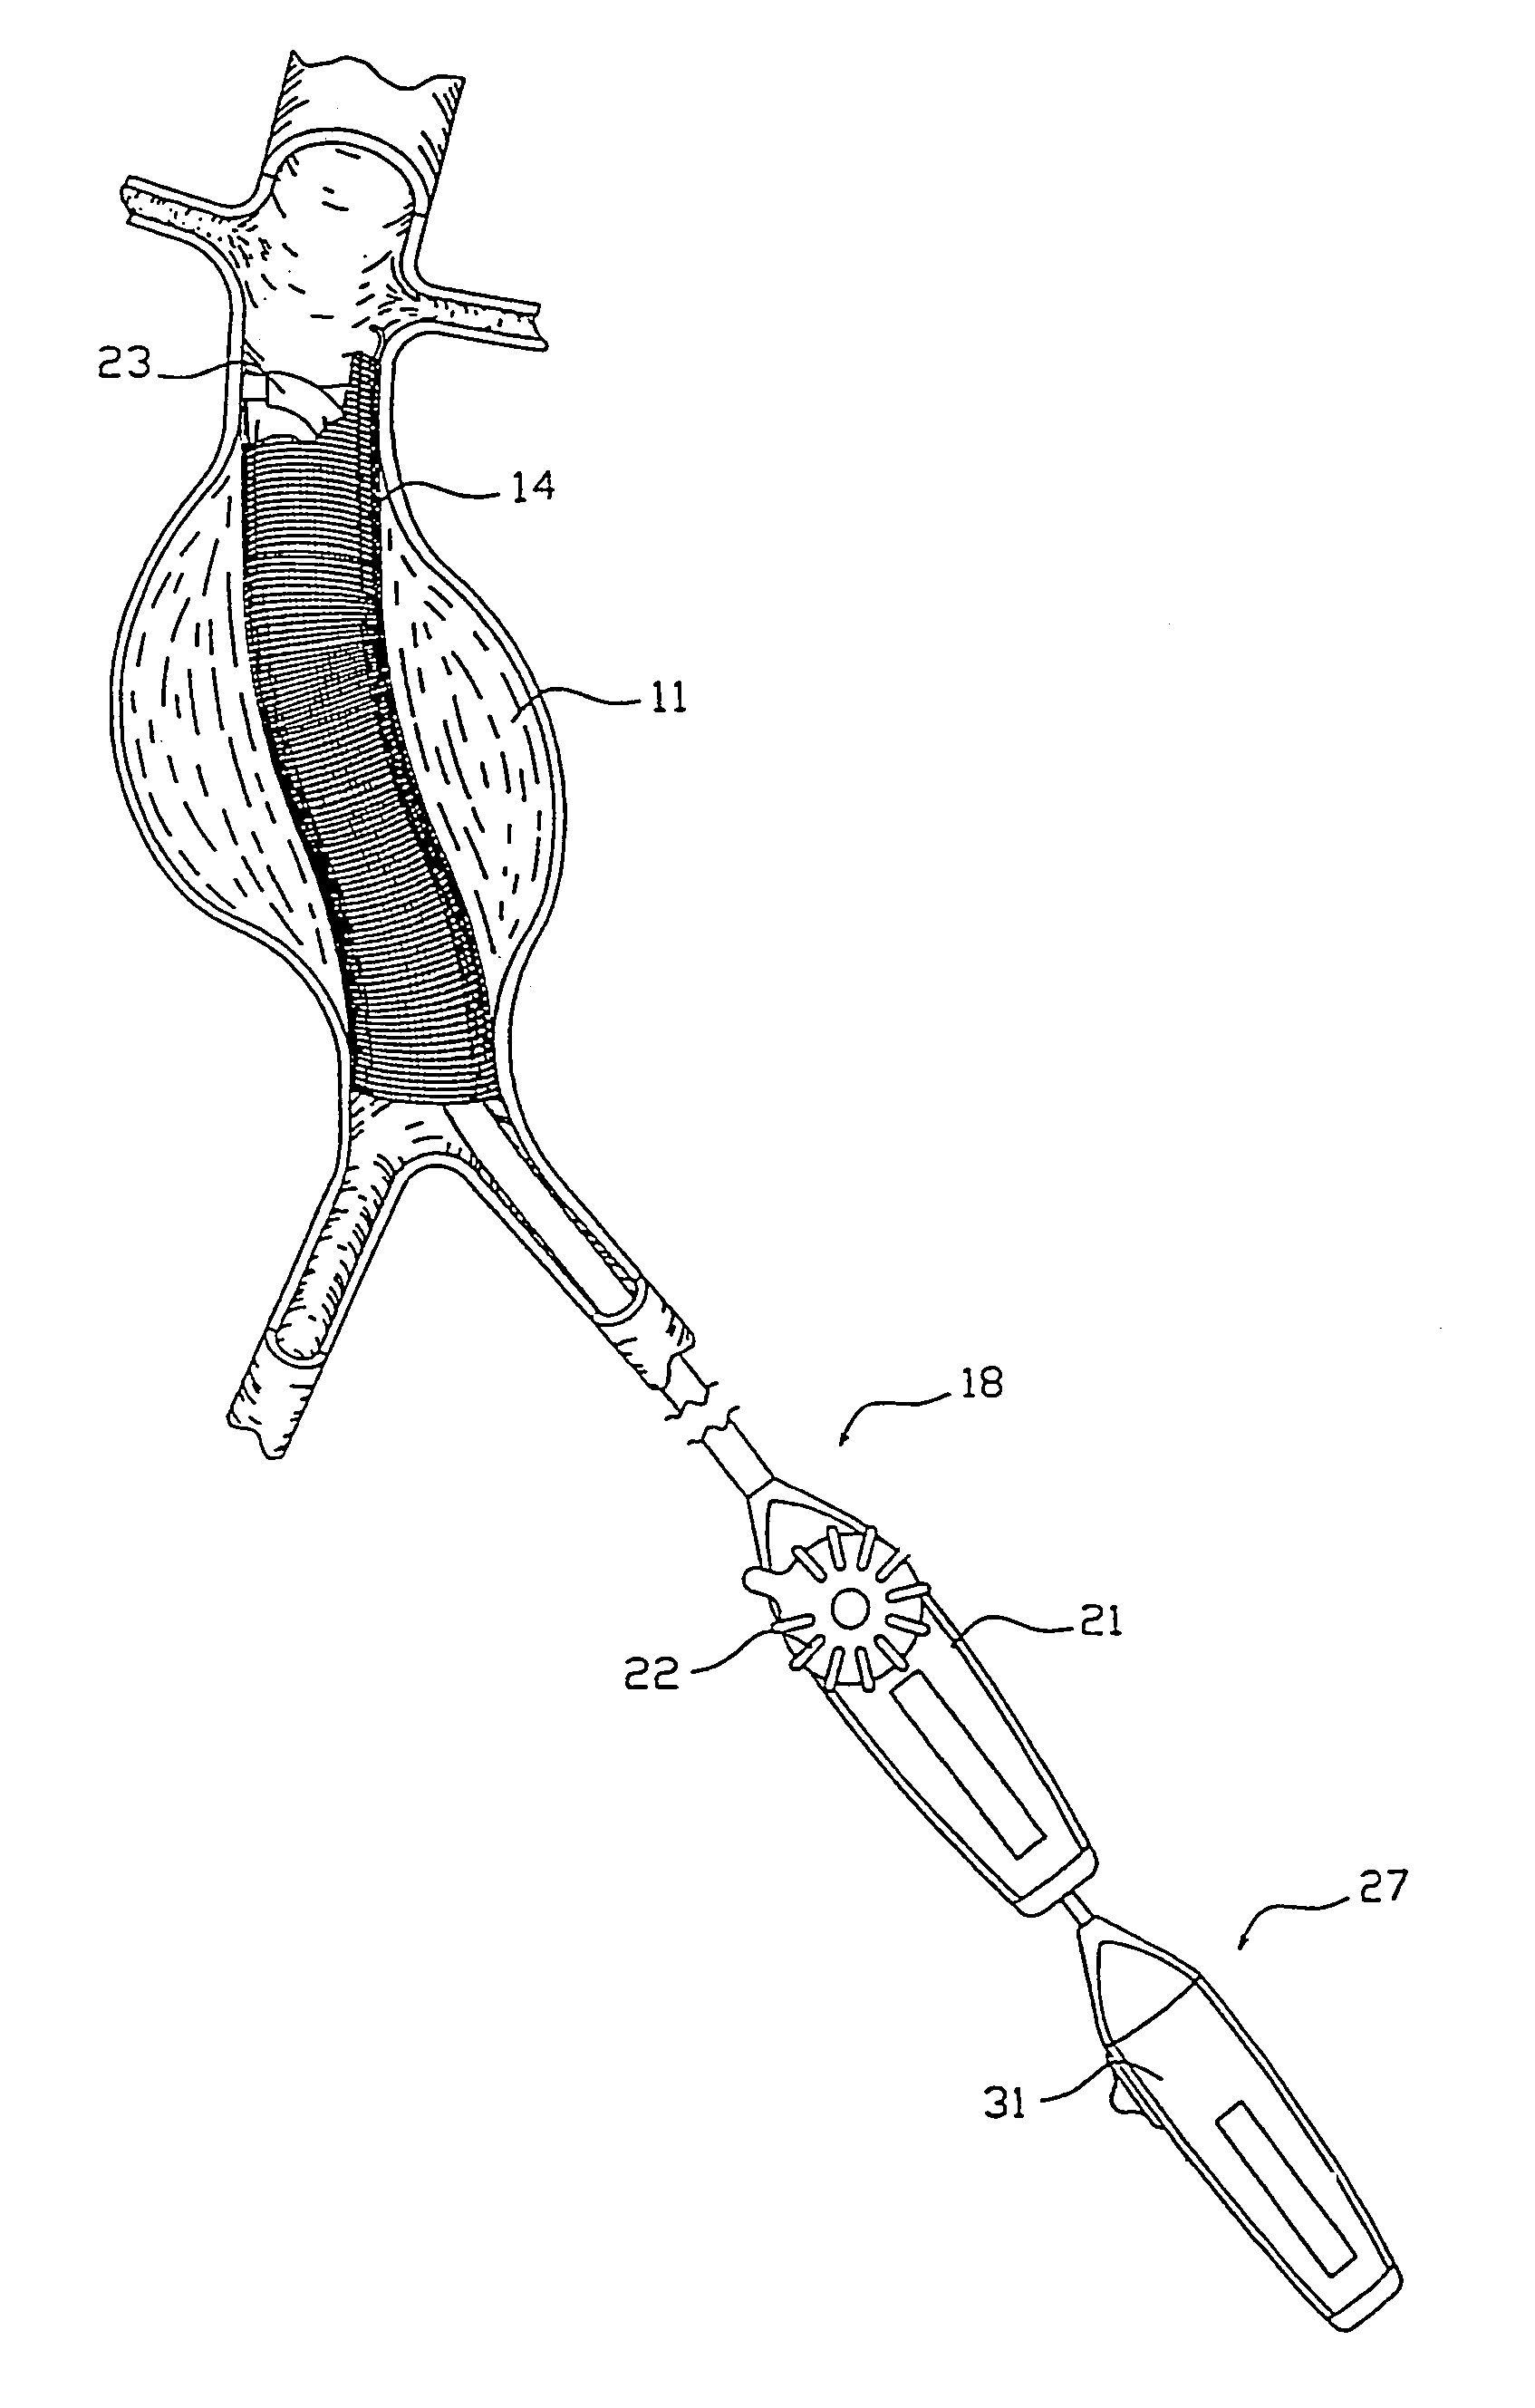 Intraluminal prosthesis attachment systems and methods